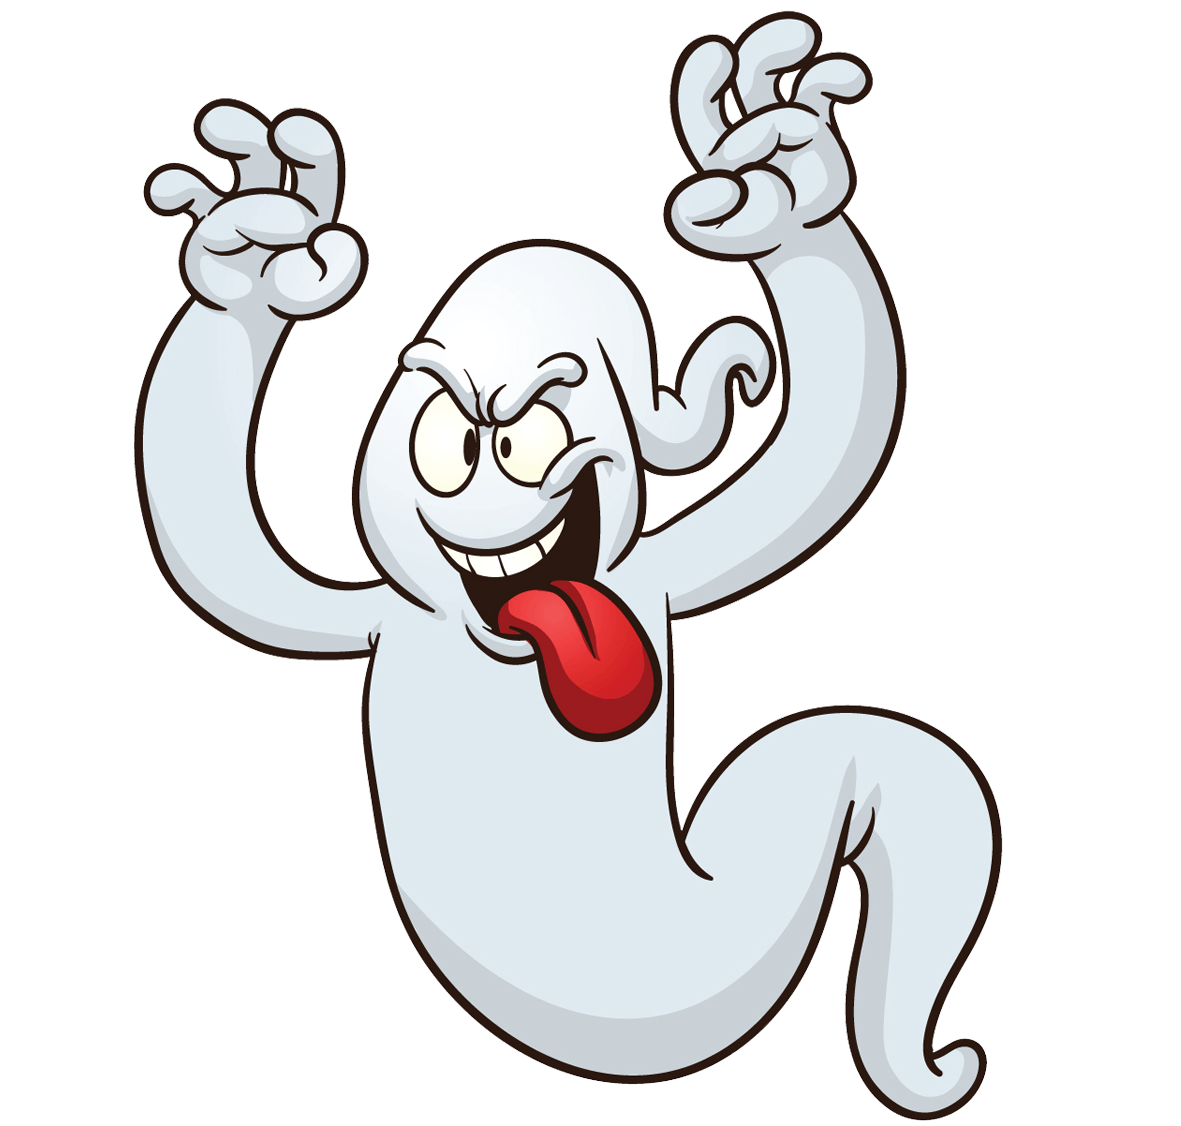 Fear clipart panic. The ghost method end